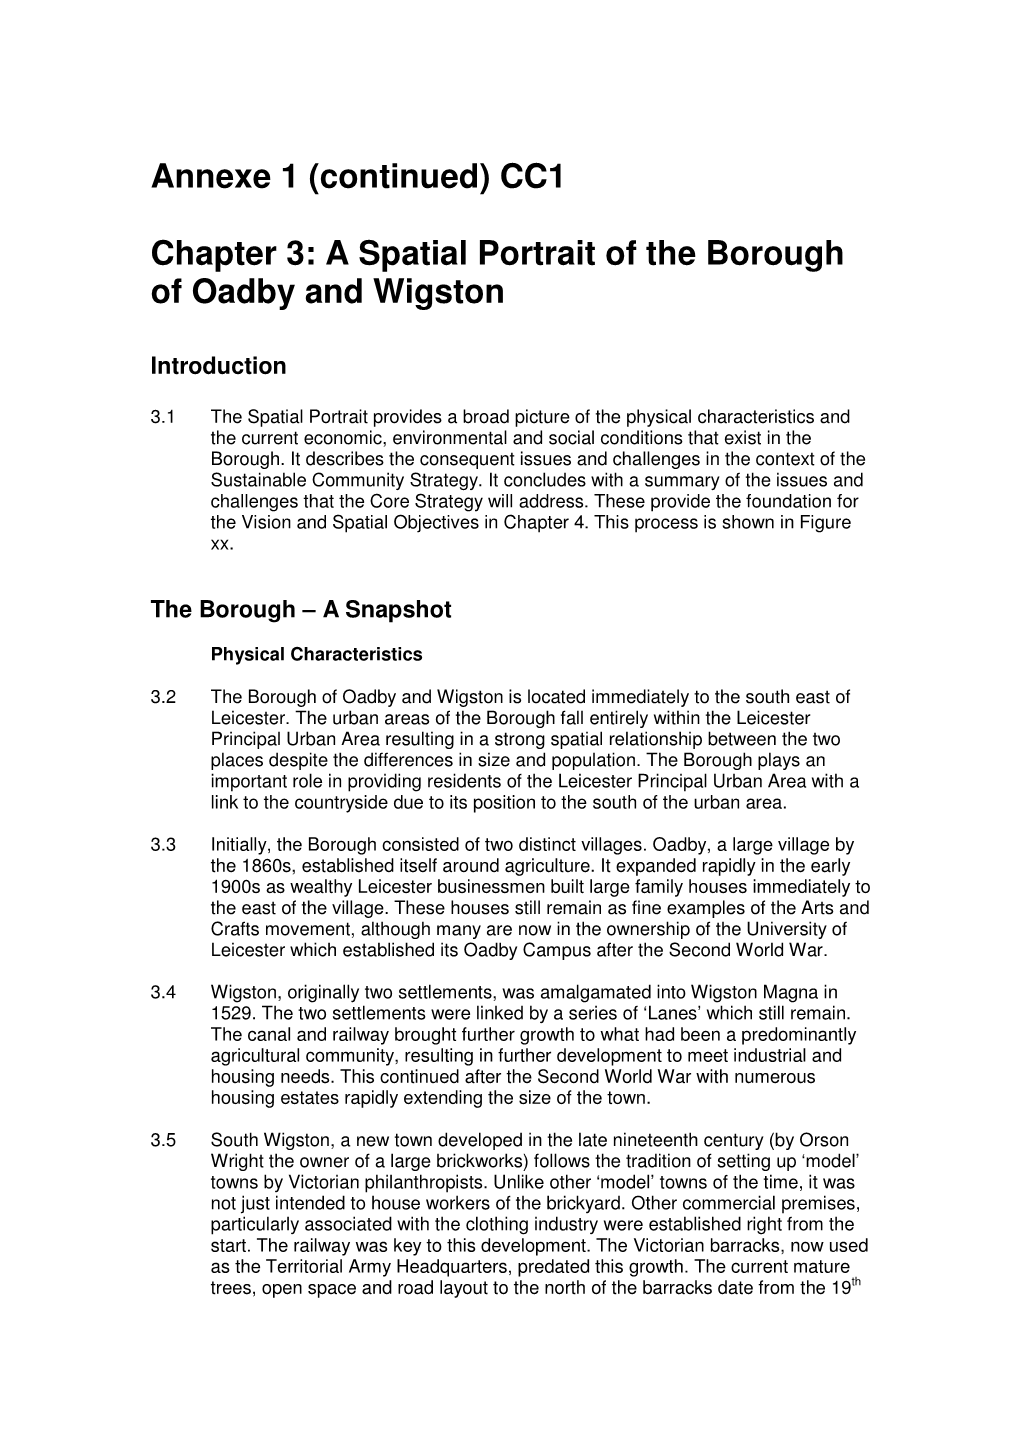 Annexe 1 (Continued) CC1 Chapter 3: a Spatial Portrait of the Borough Of